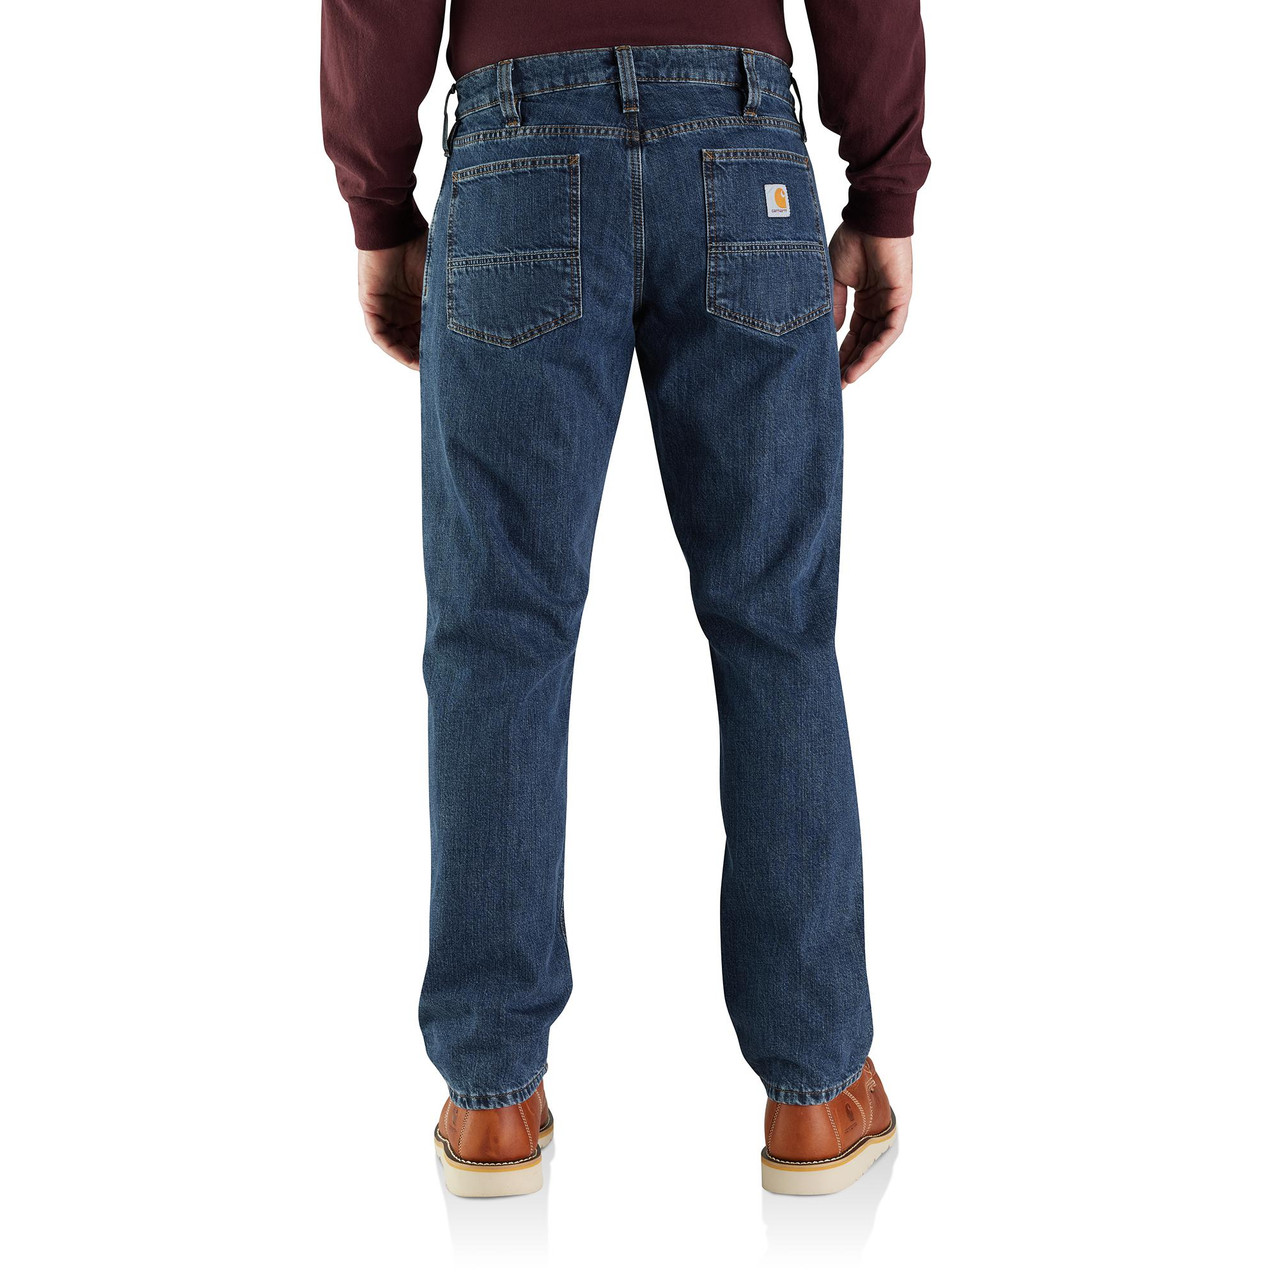 Men's Carhartt Relaxed Fit Flannel Lined Jeans - Herbert's Boots and ...